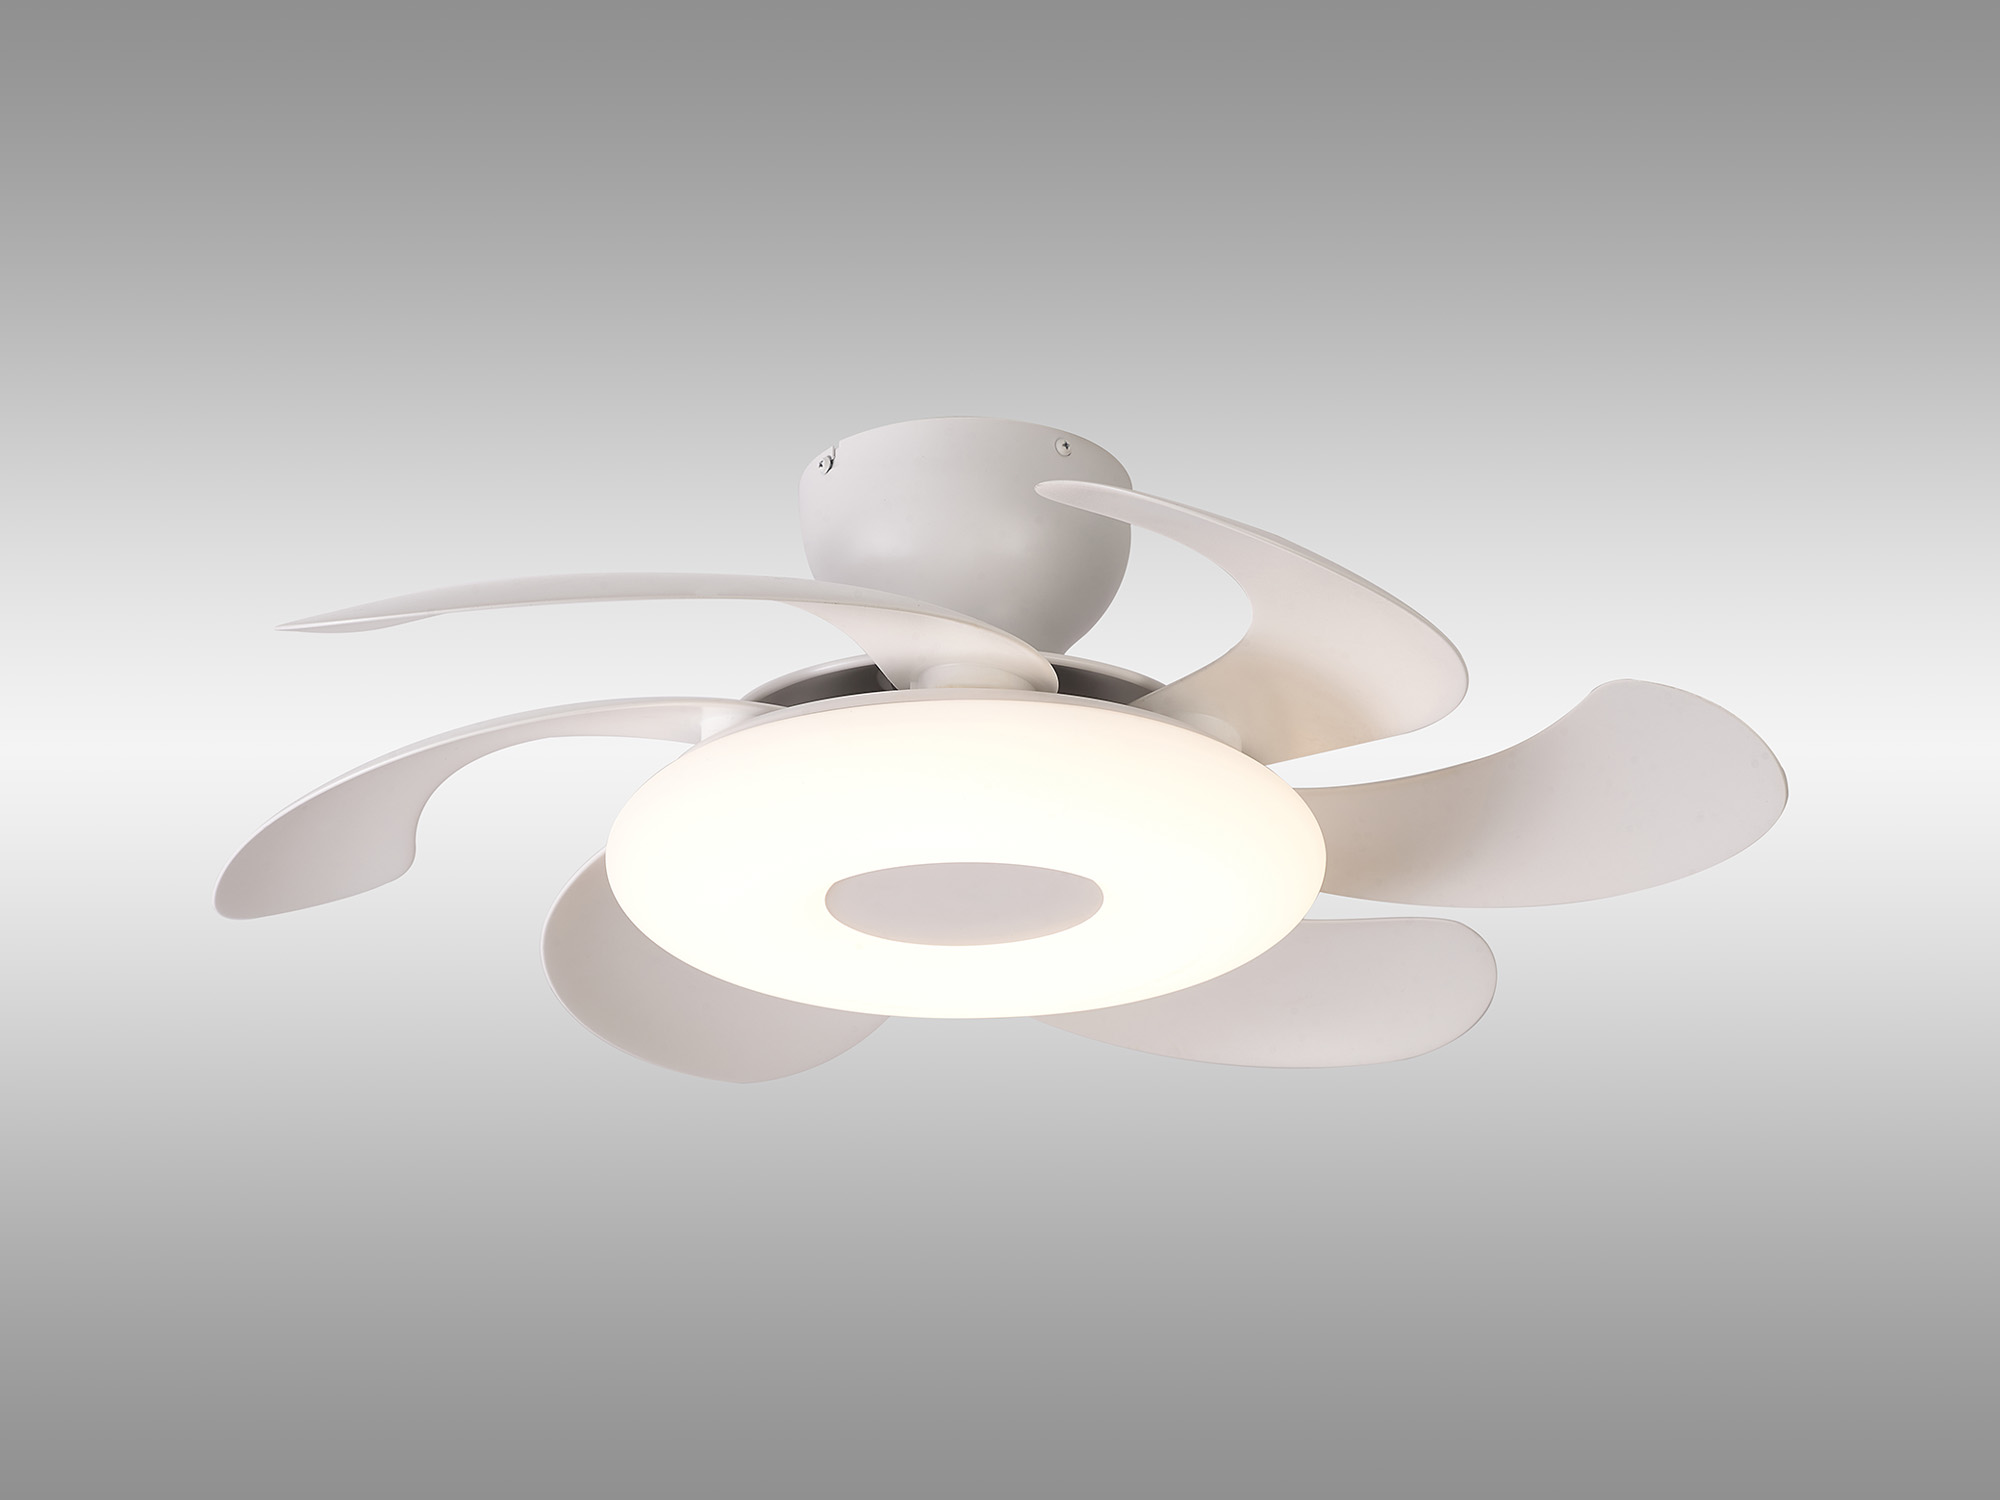 Flowers Heating, Cooling & Ventilation Mantra Ceiling Fans